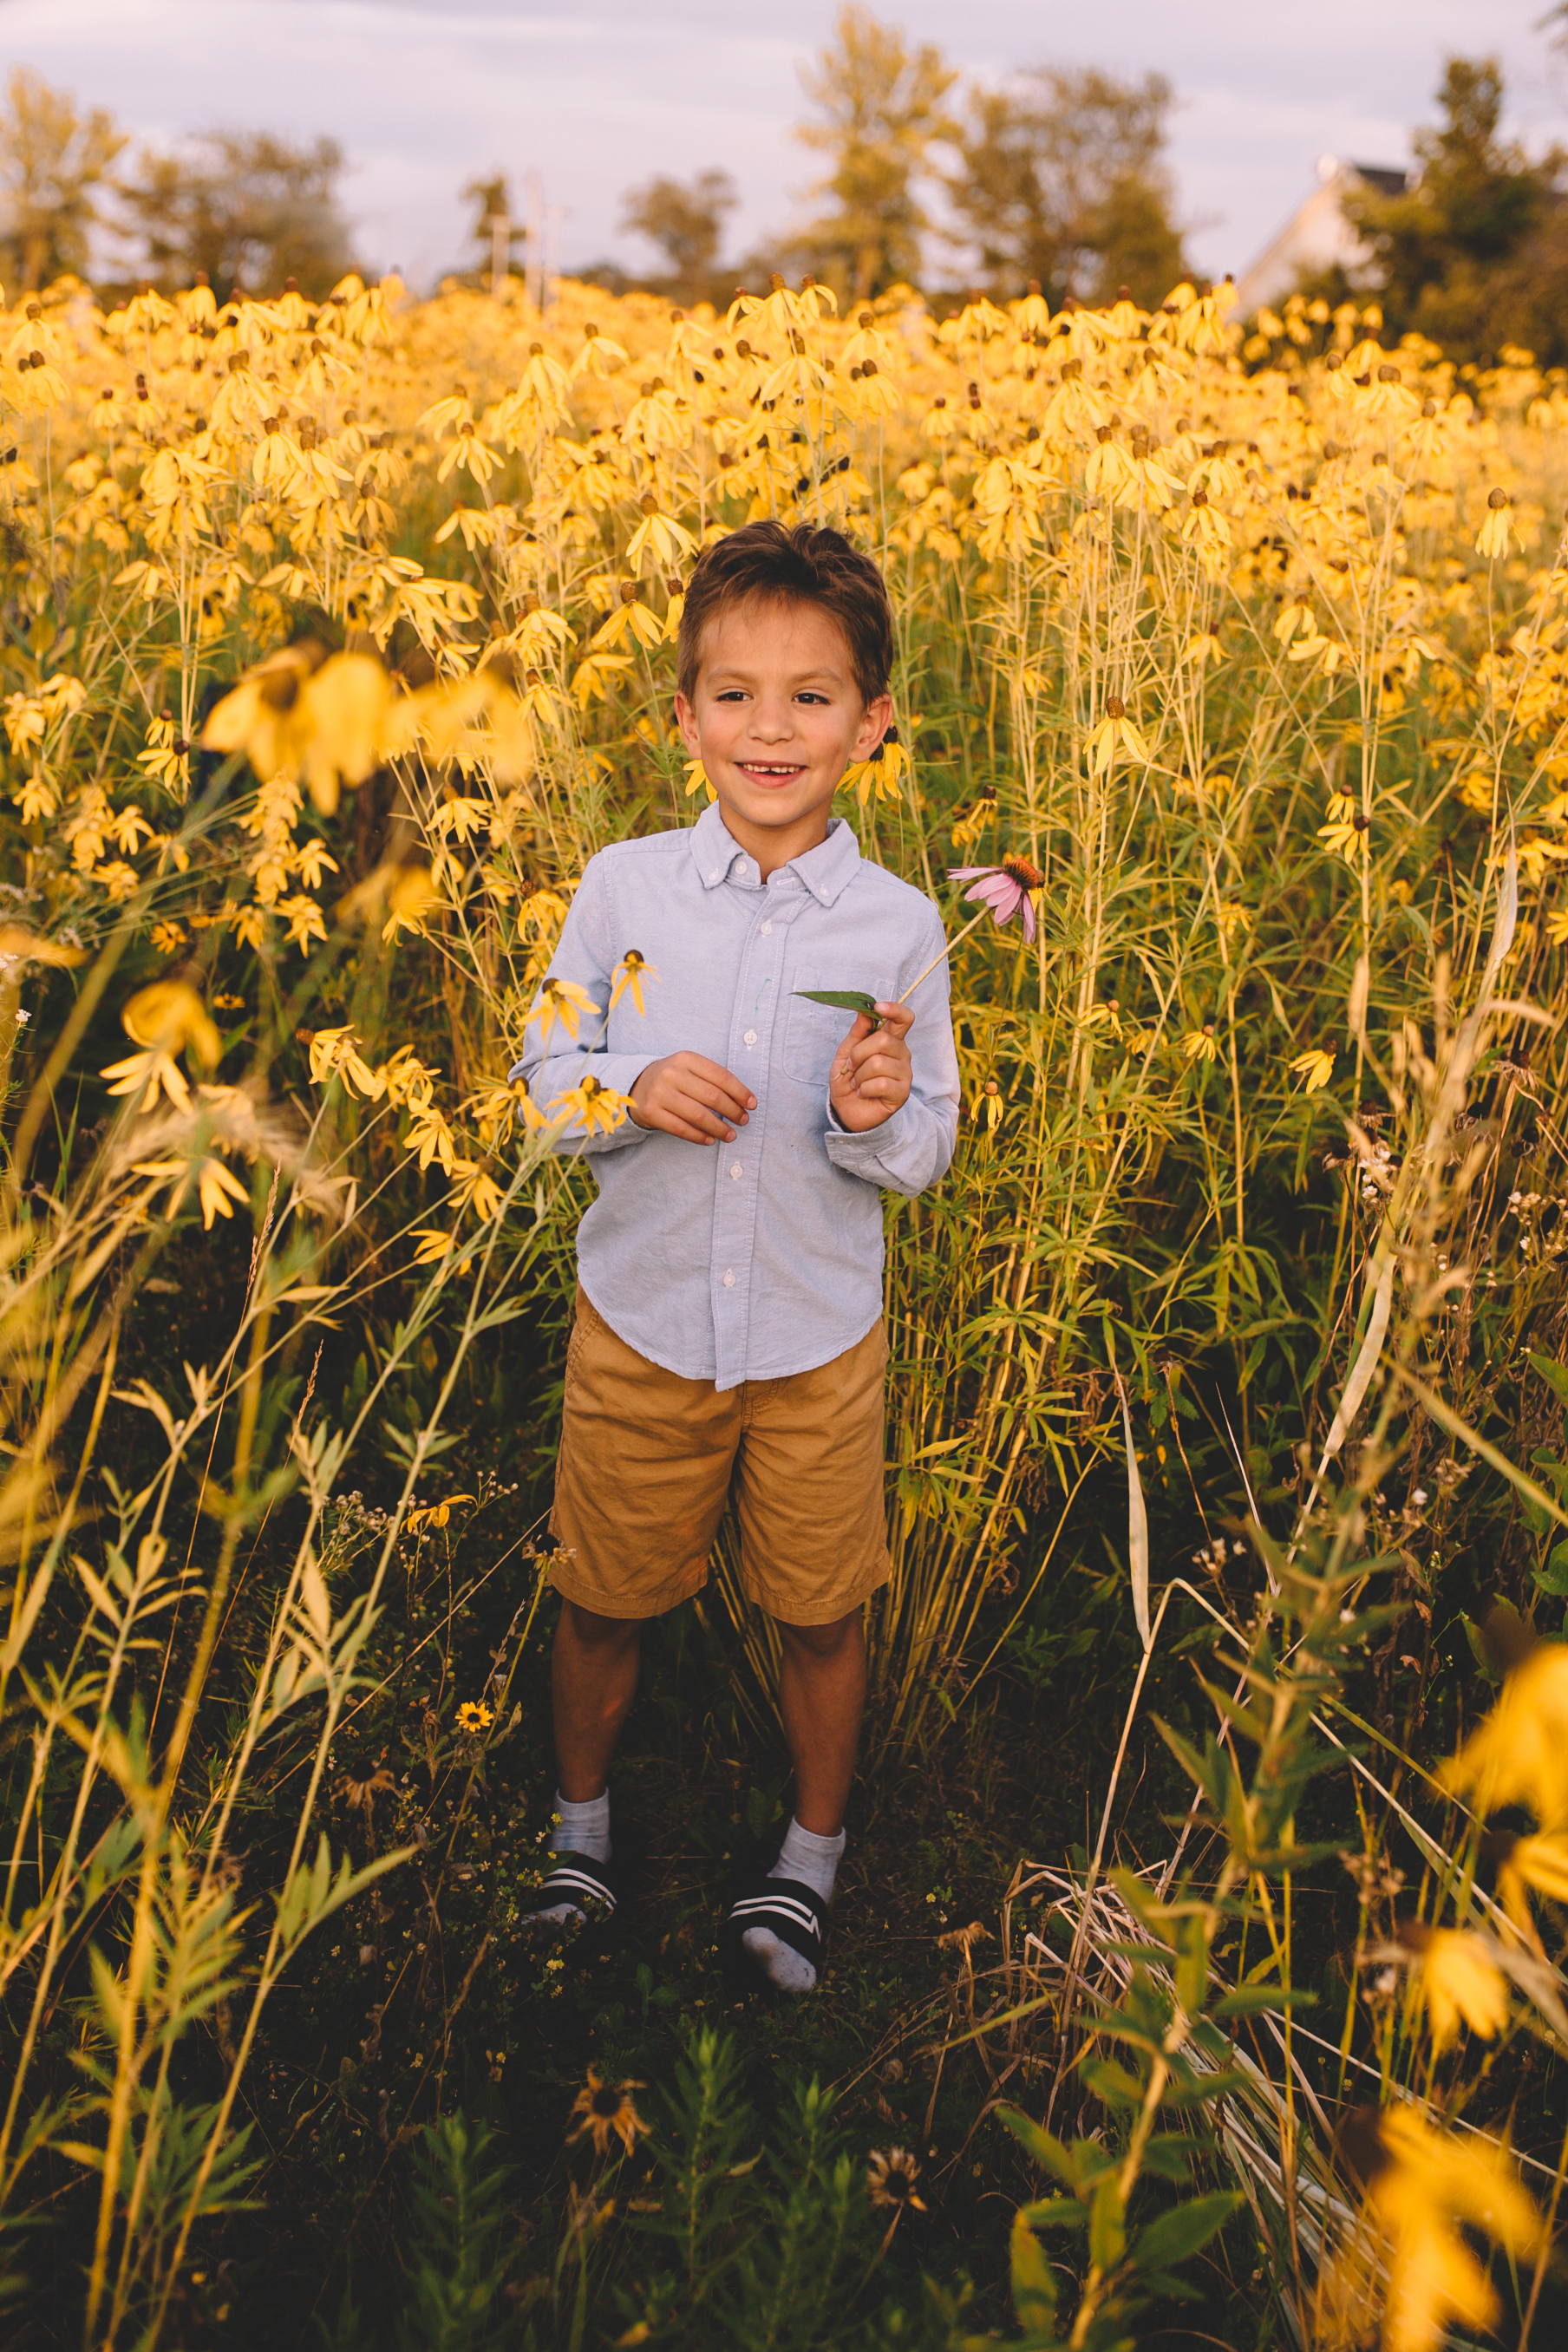 Golden Flower Field Mini Session Indianapolis IN (49 of 58).jpg